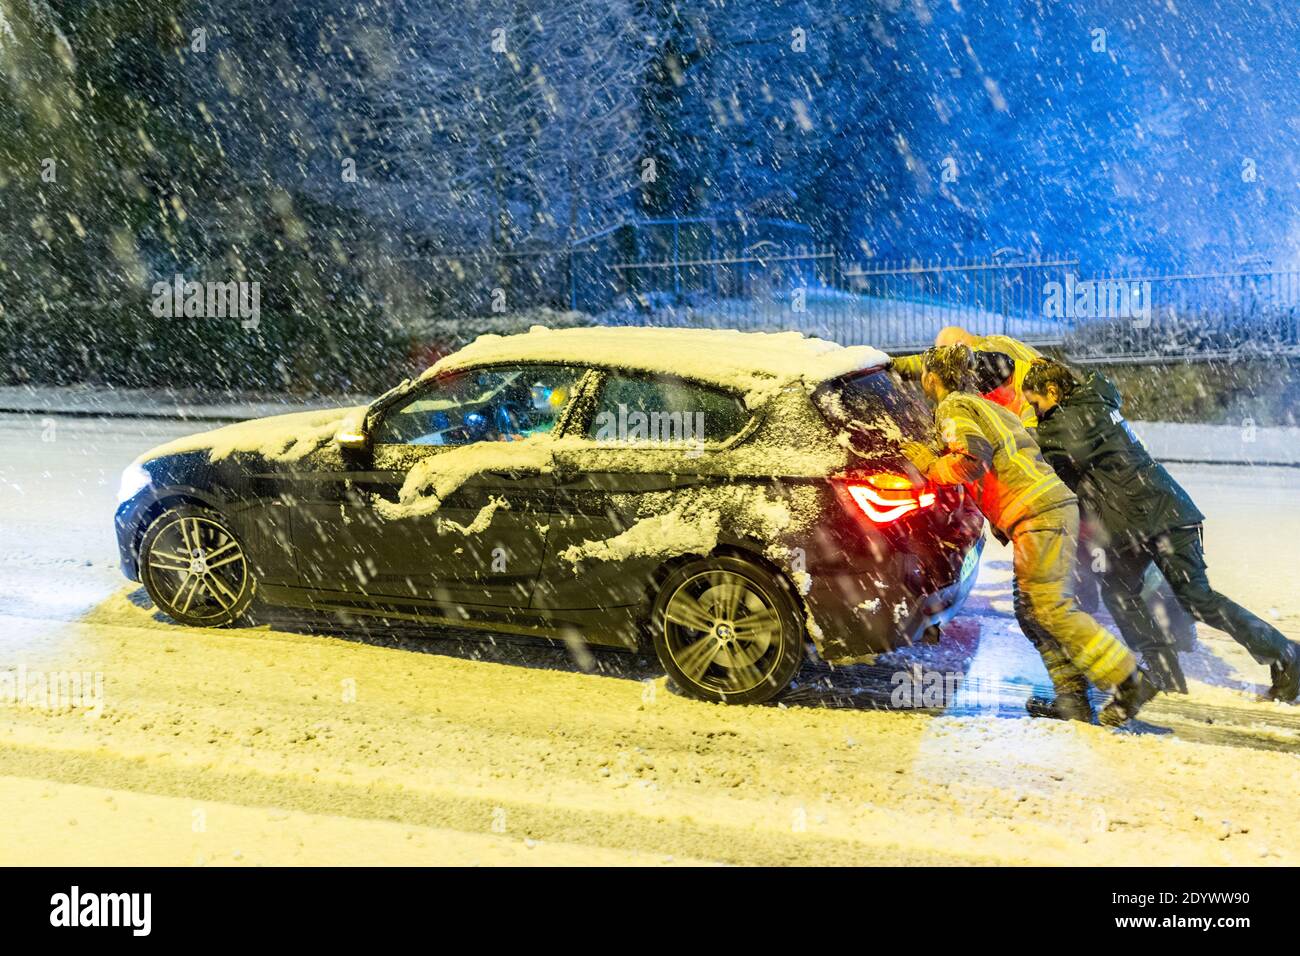 Cradley Heath, West Midlands, UK. 28th Dec, 2020. A fire crew pushes a stranded paramedic's car up a snowy hill this morning, as she tries to make it into work for her day's shift. Snow settles and causes traffic delays in Cradley Heath in the West Midlands Credit: Peter Lopeman/Alamy Live News Stock Photo